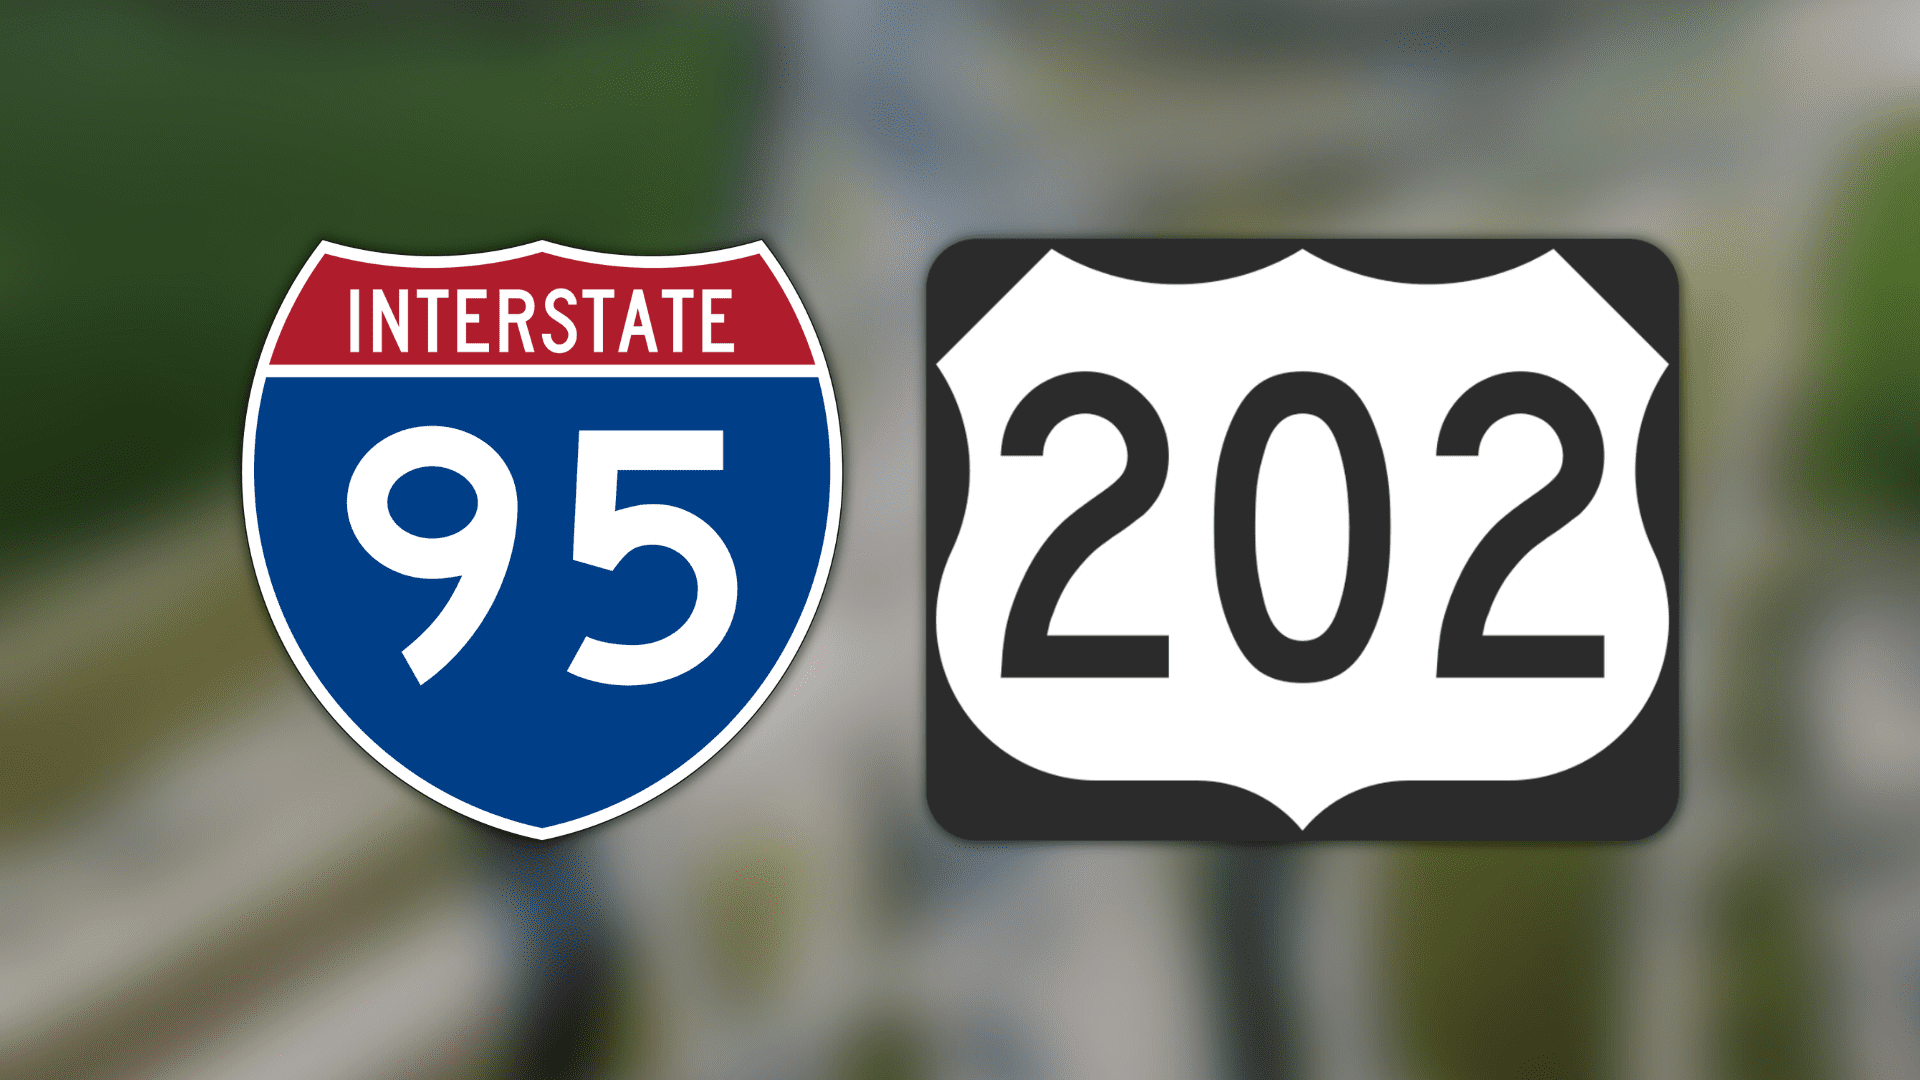 Featured image for “I-95 lane changes coming Thursday near U.S. 202”